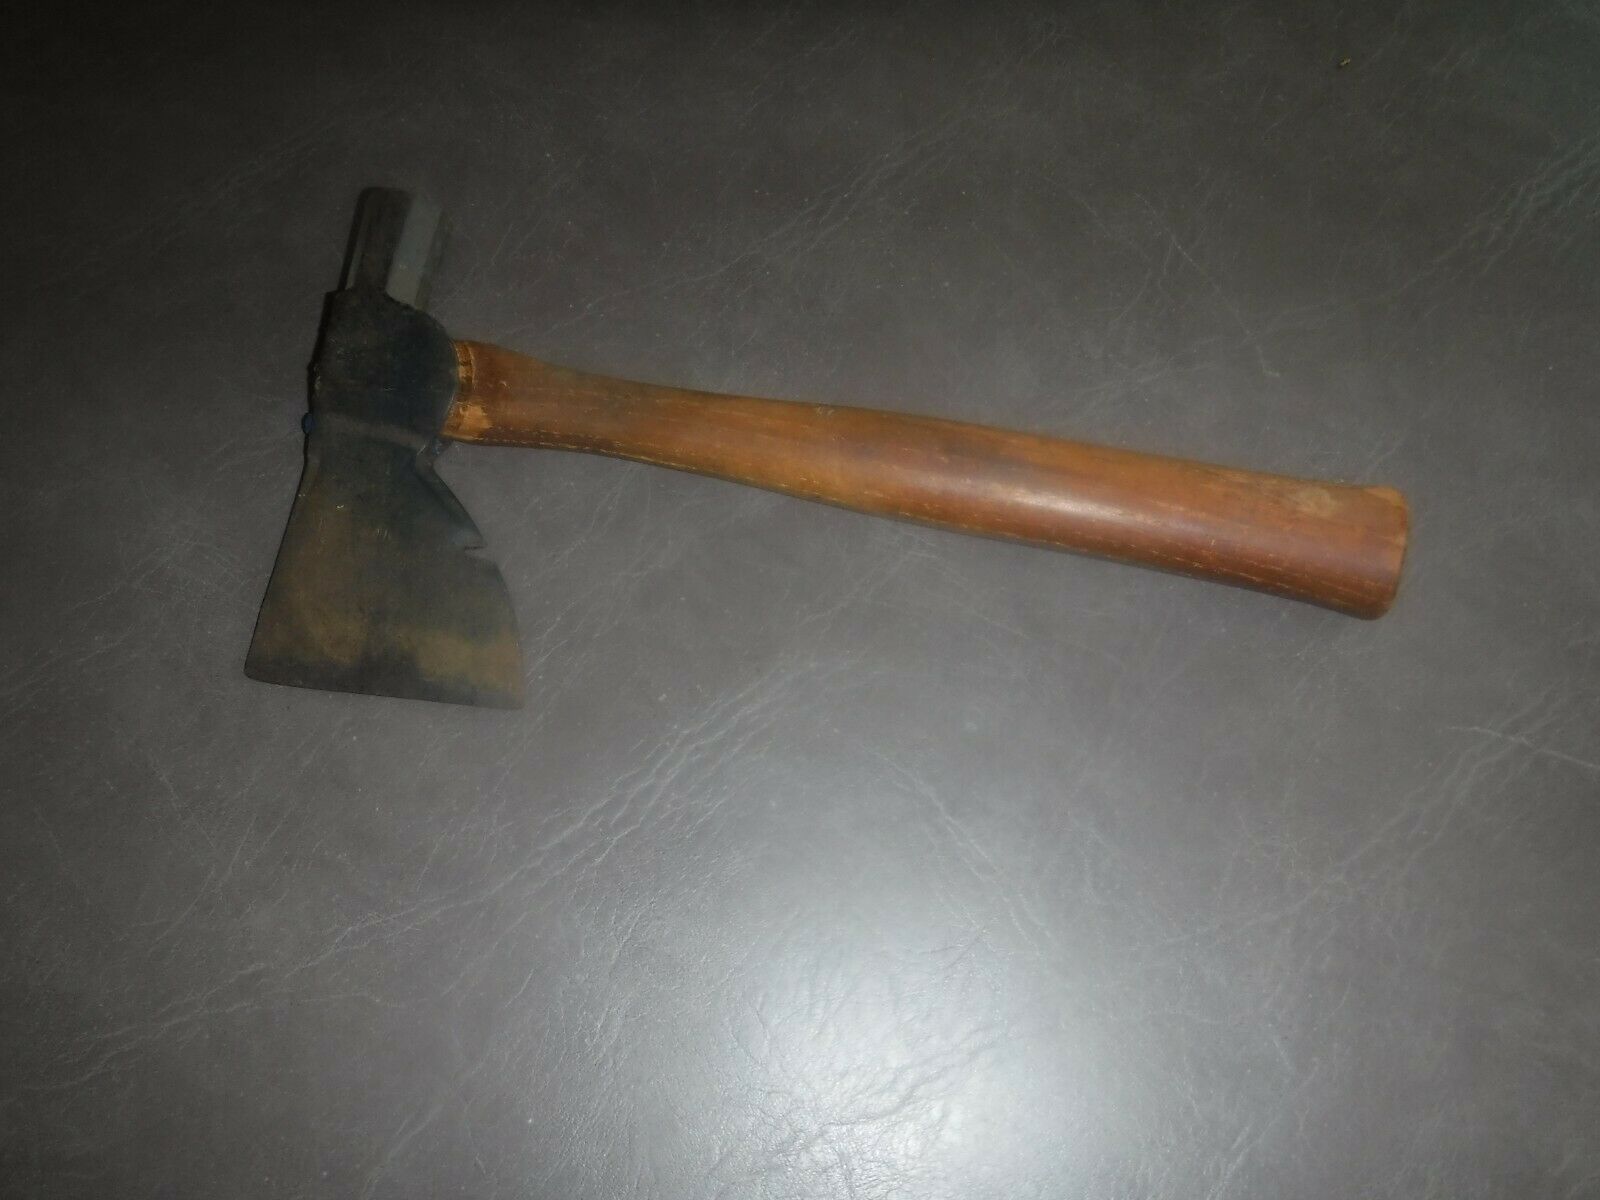 Vintage Stanley Hatchet Hand Axe Tool - Made In U.s.a.